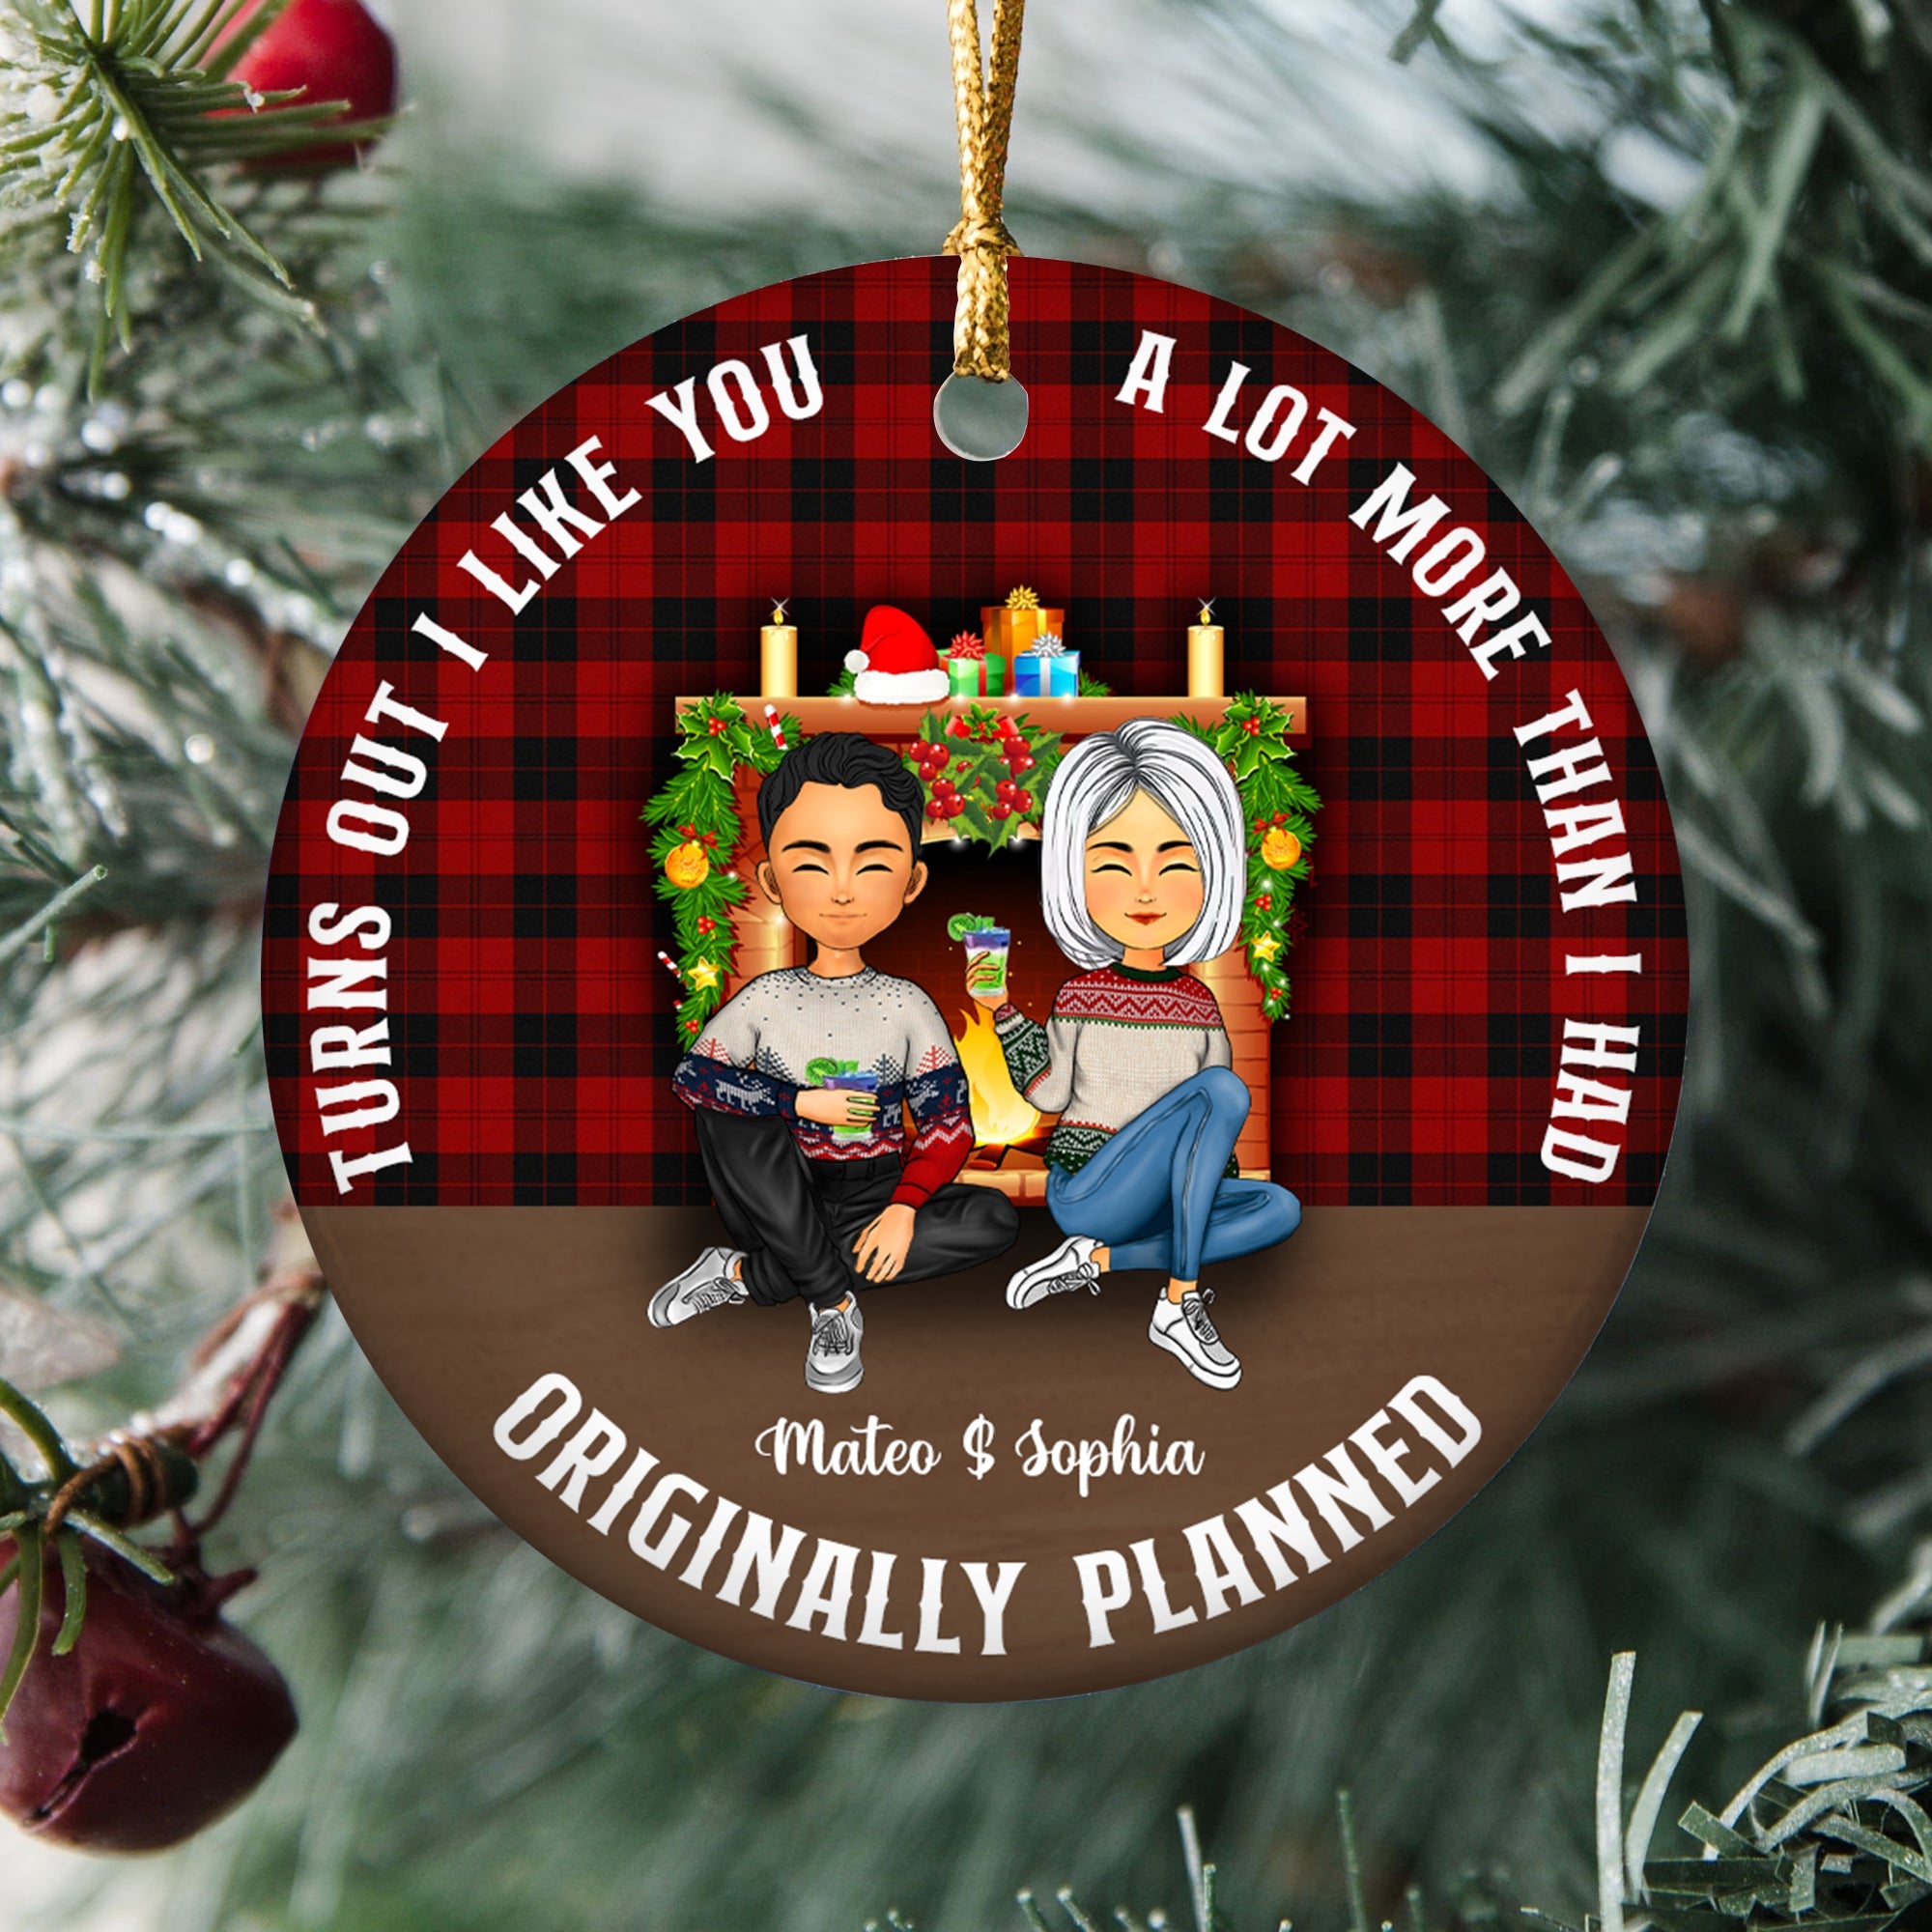 Turns Out I Like You A Lot More Than I Had Originally Planned - Gift For Couple, Husband, Wife - Christmas Gift - Personalized Circle Ceramic Ornament